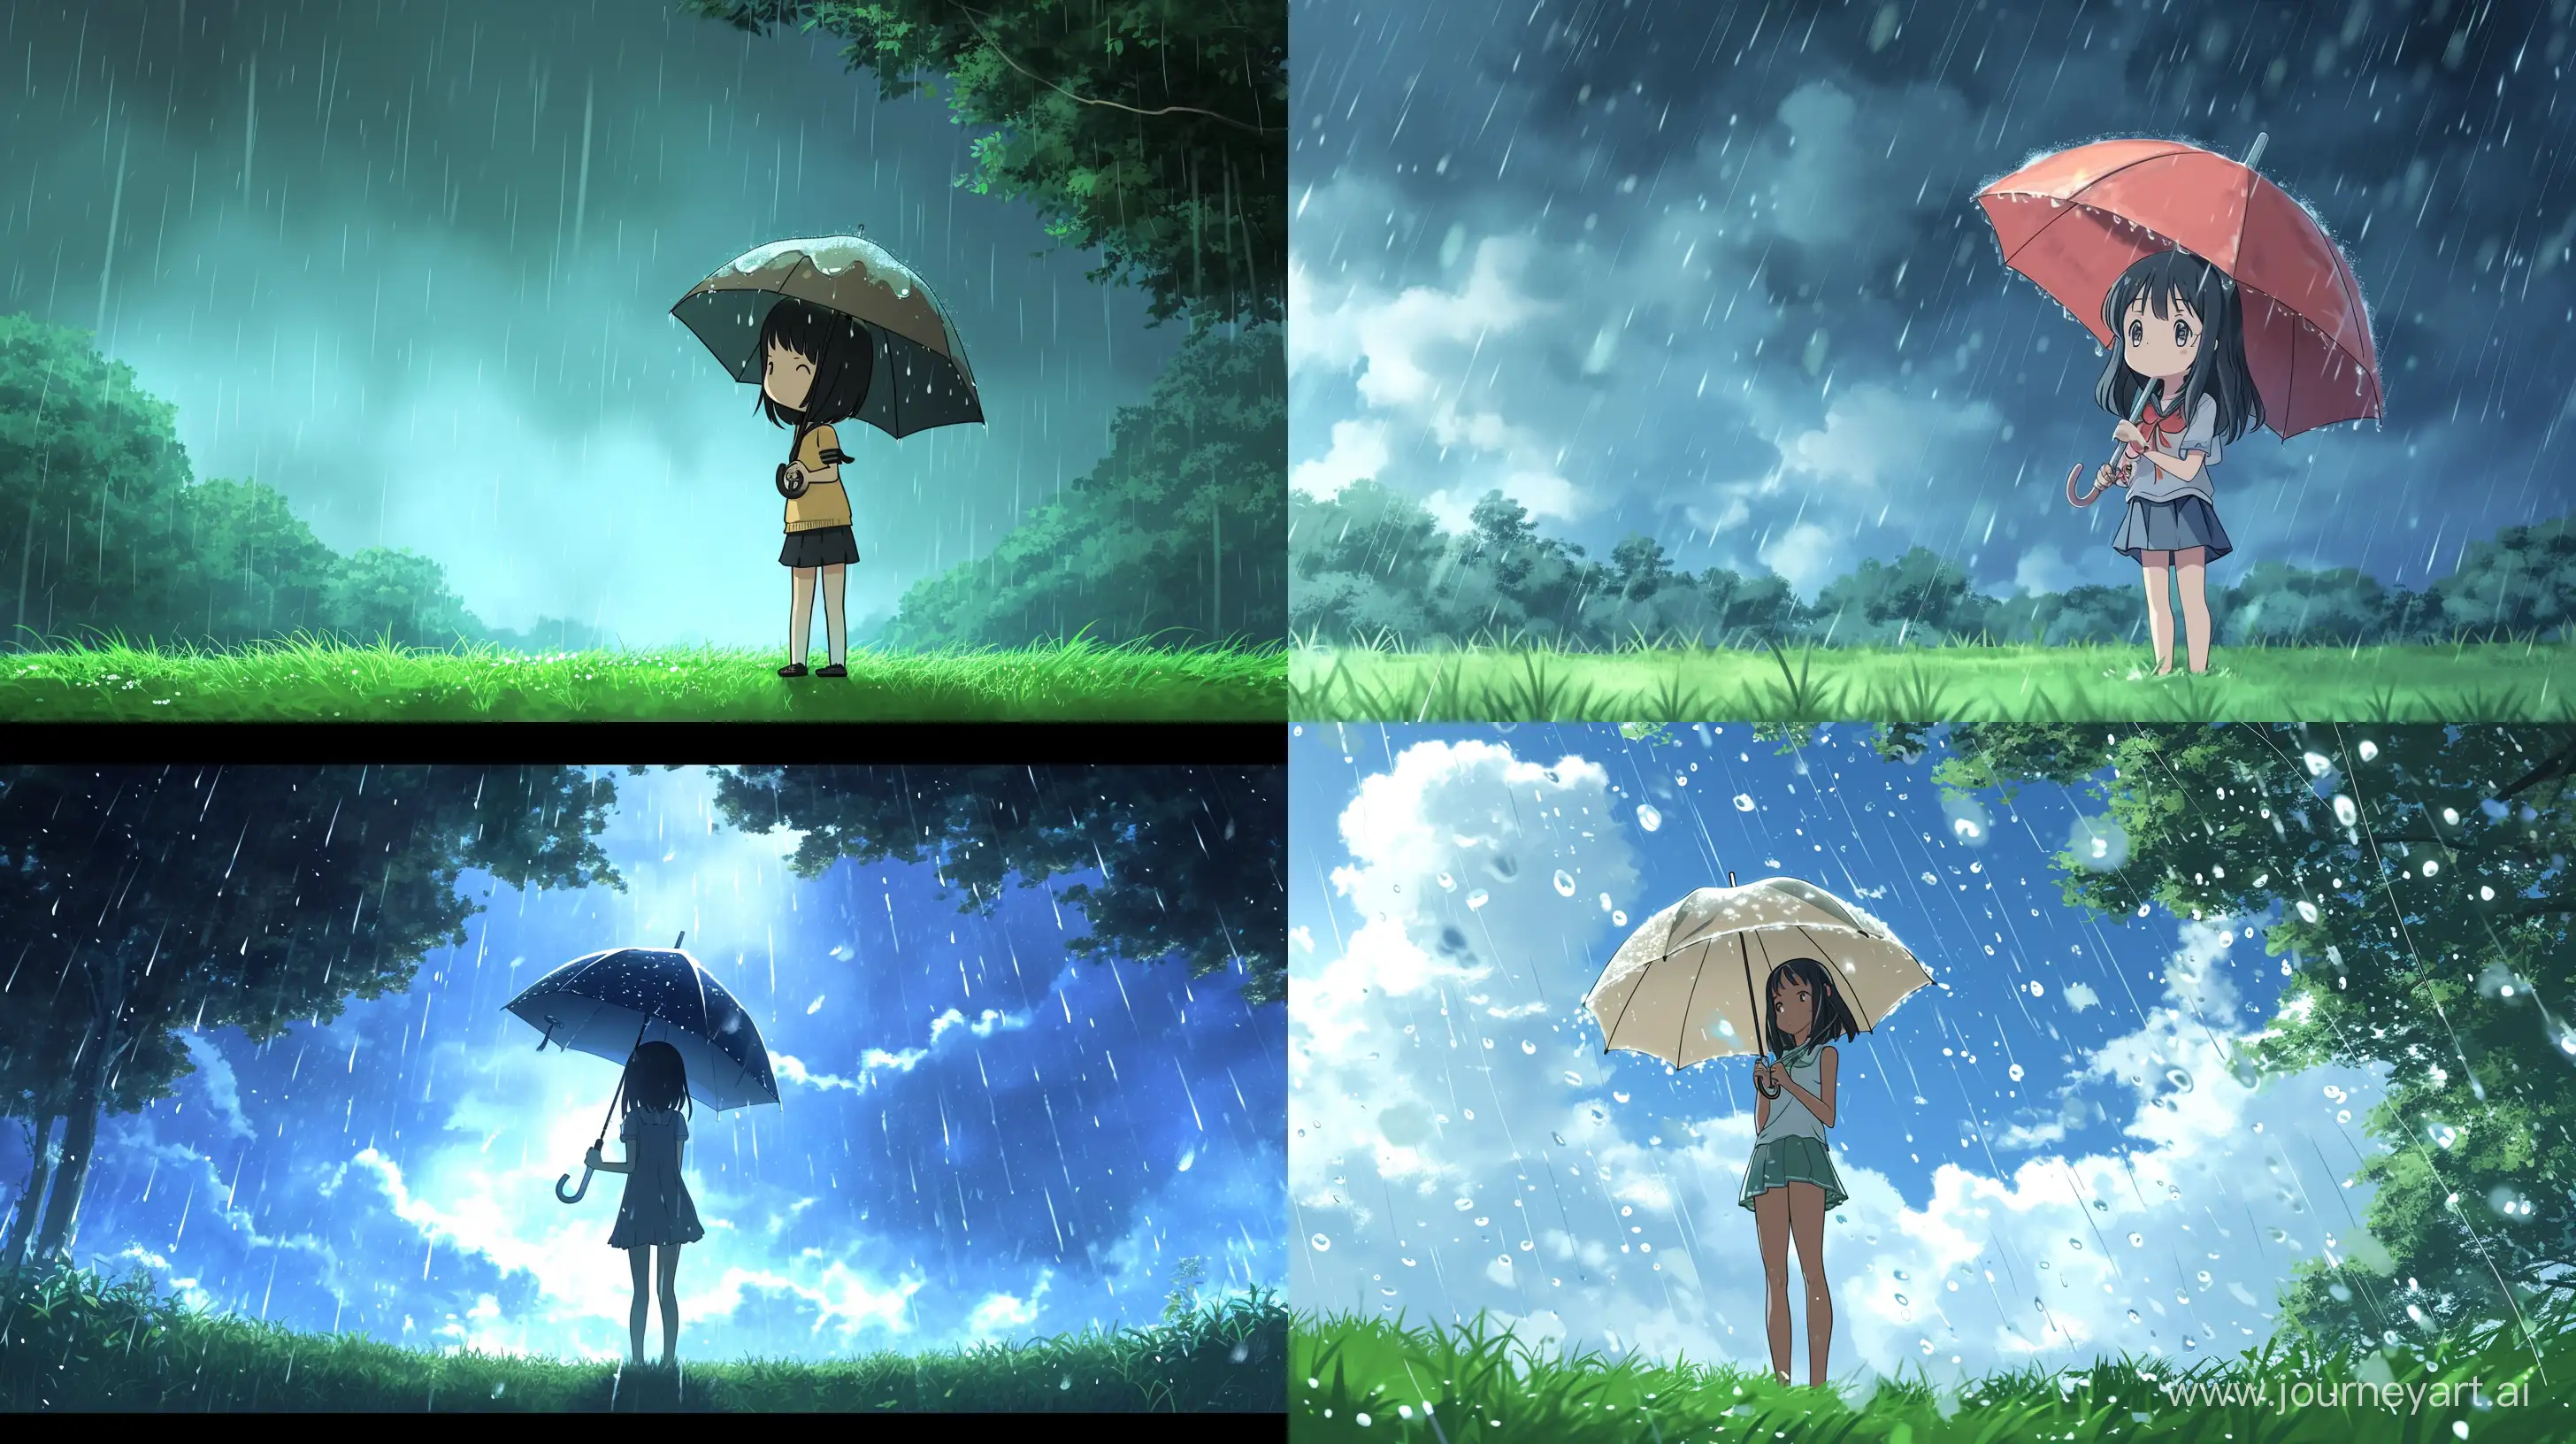 Charming-Chibi-Girl-Standing-in-the-Rain-with-Umbrella